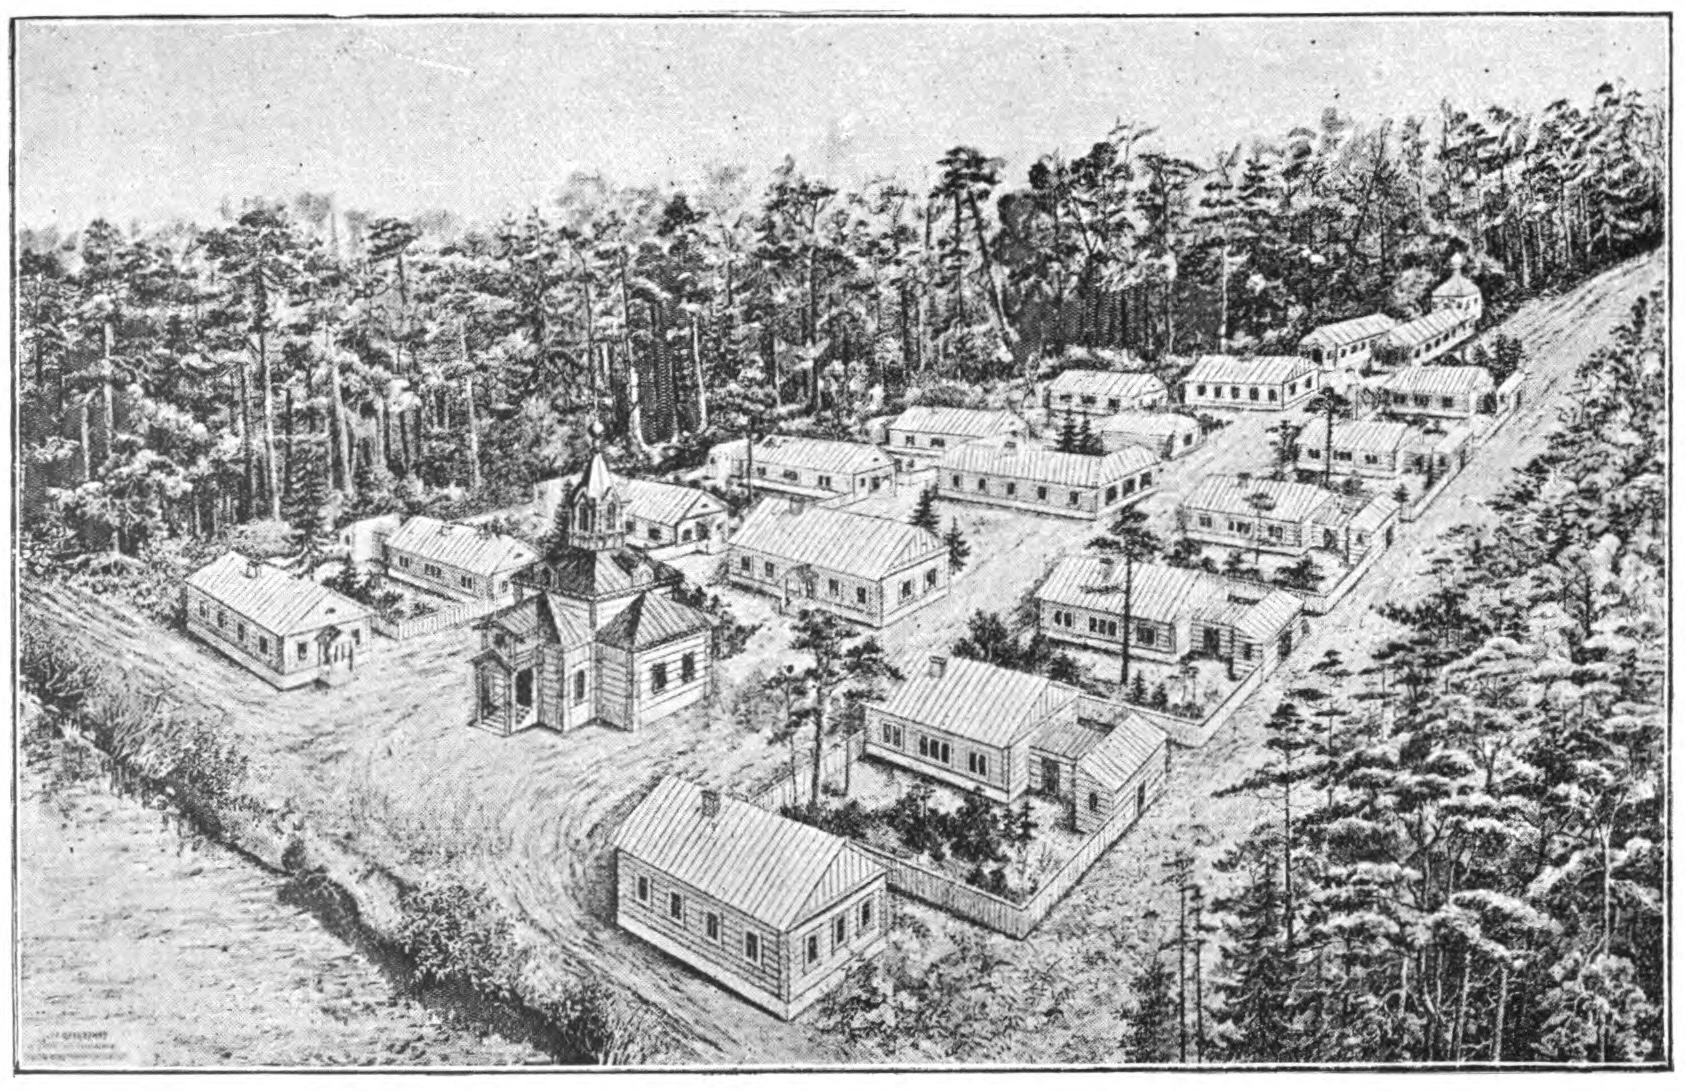 A drawing of a couple of streets of buildings in the woods